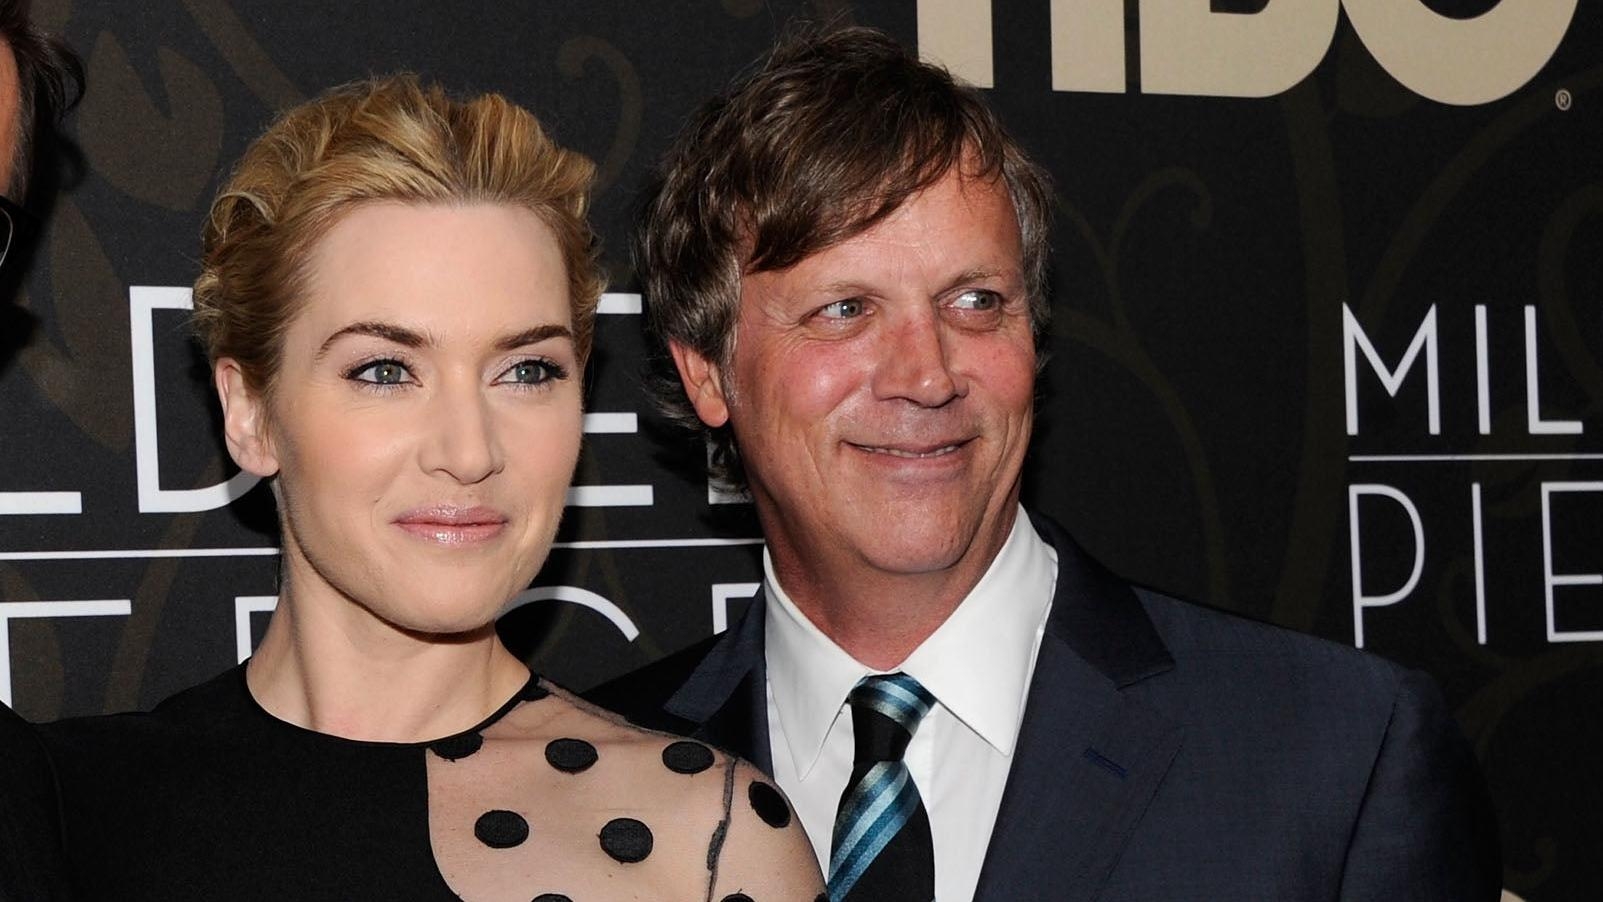 Kate Winslet reunites with Todd Haynes for her next limited series